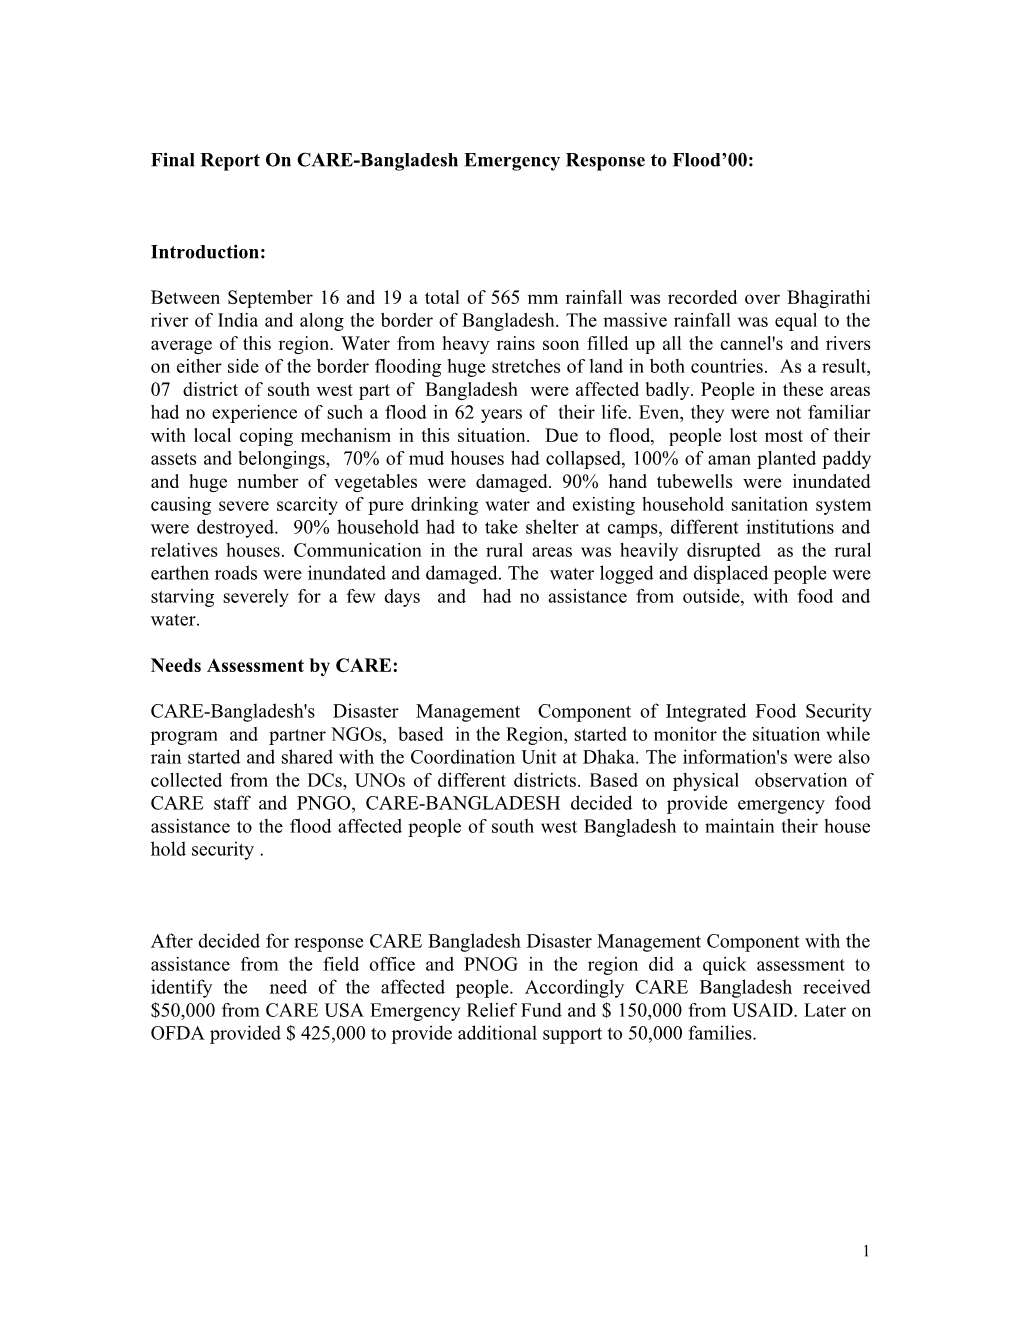 Final Report on CARE-Bangladesh Emergency Response to Flood’00